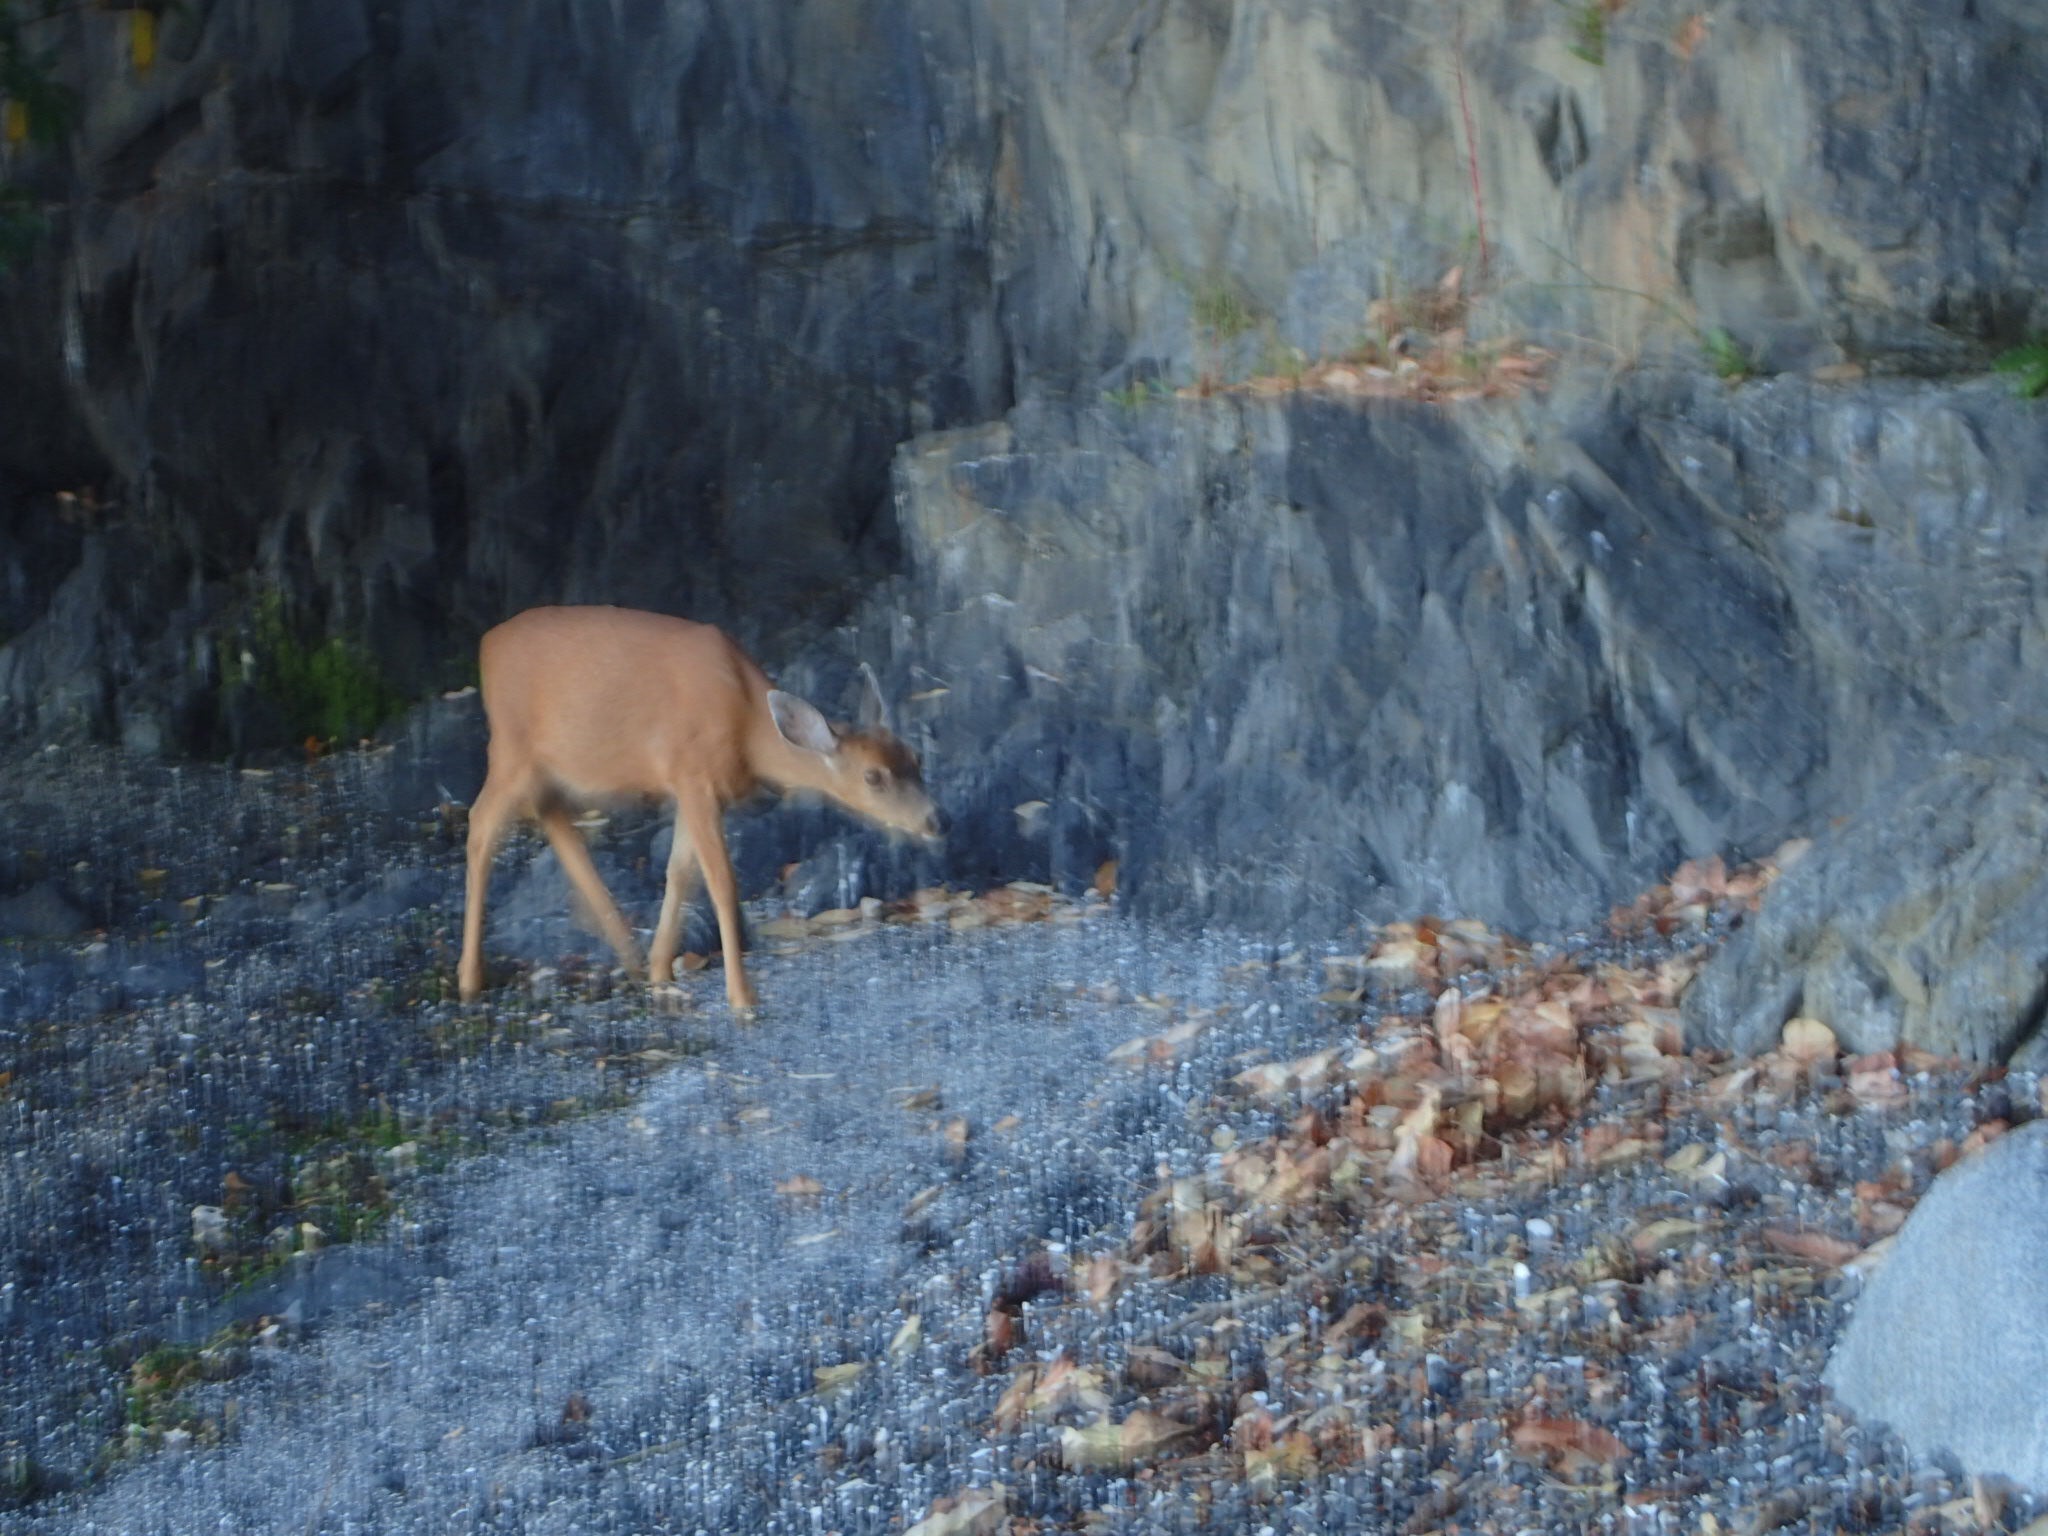 Blurry photo of a far too brave deer